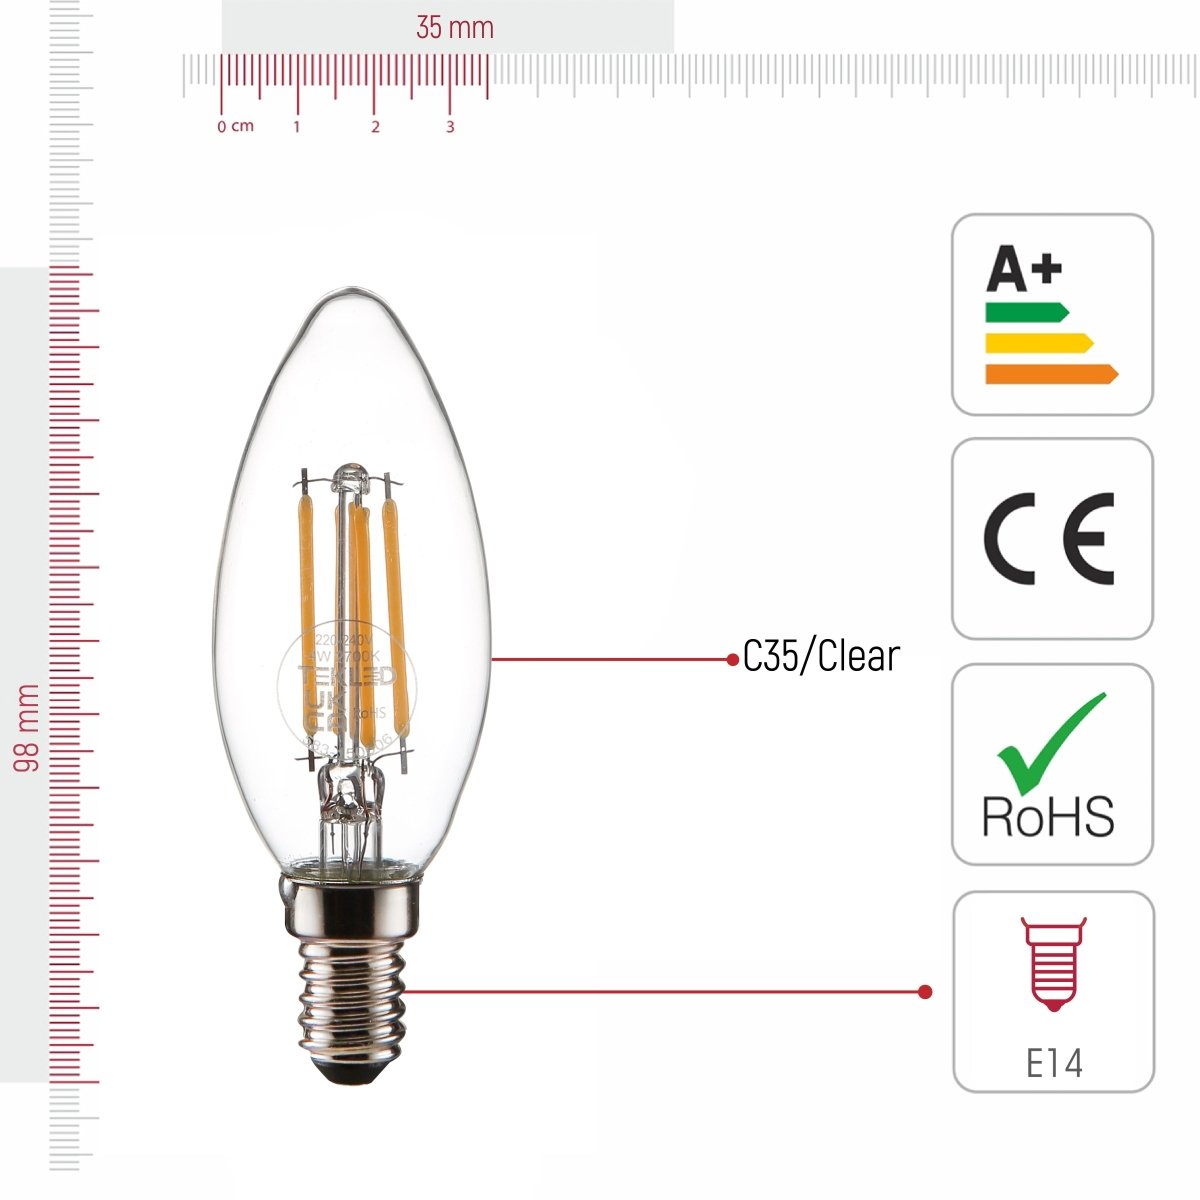 Size and certifications of LED Filament Bulb C35 Candle E14 Small Edison Screw 4W 470lm Cool White 4000K Clear Pack of 6 | TEKLED 583-150606